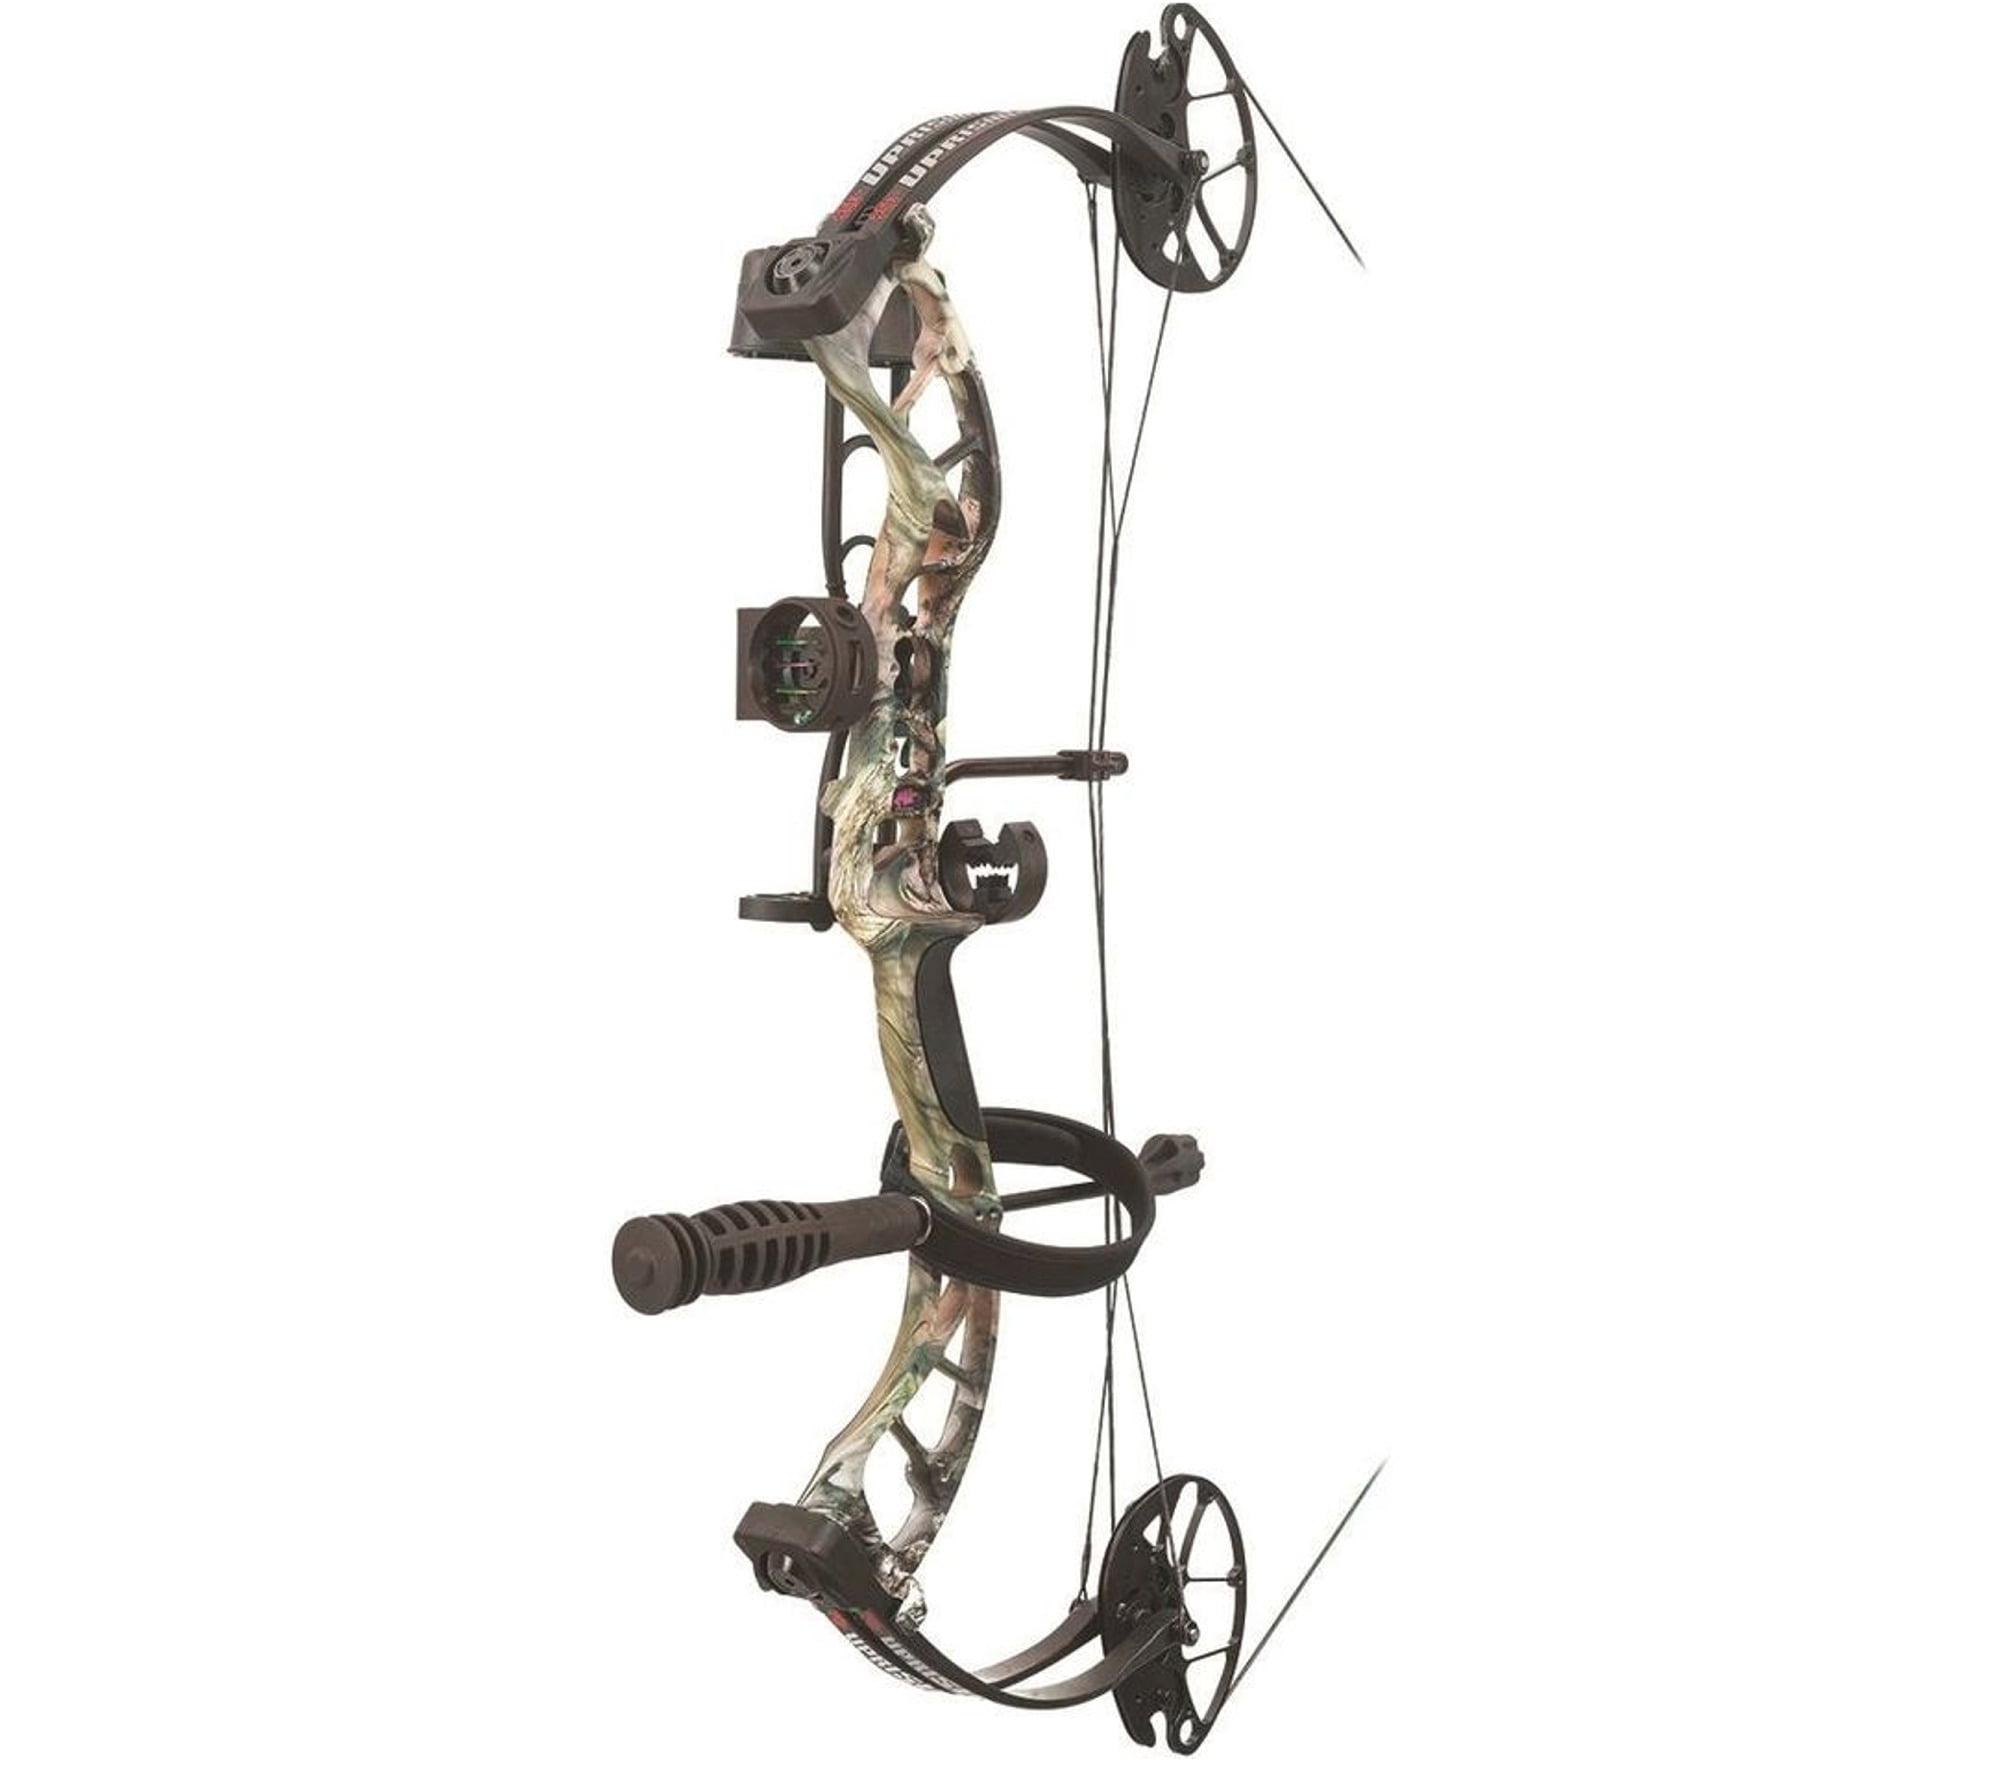 Details about   PSC Archery Gamesport Accessory Package Treestand 44014RTS Quiver  NEW 